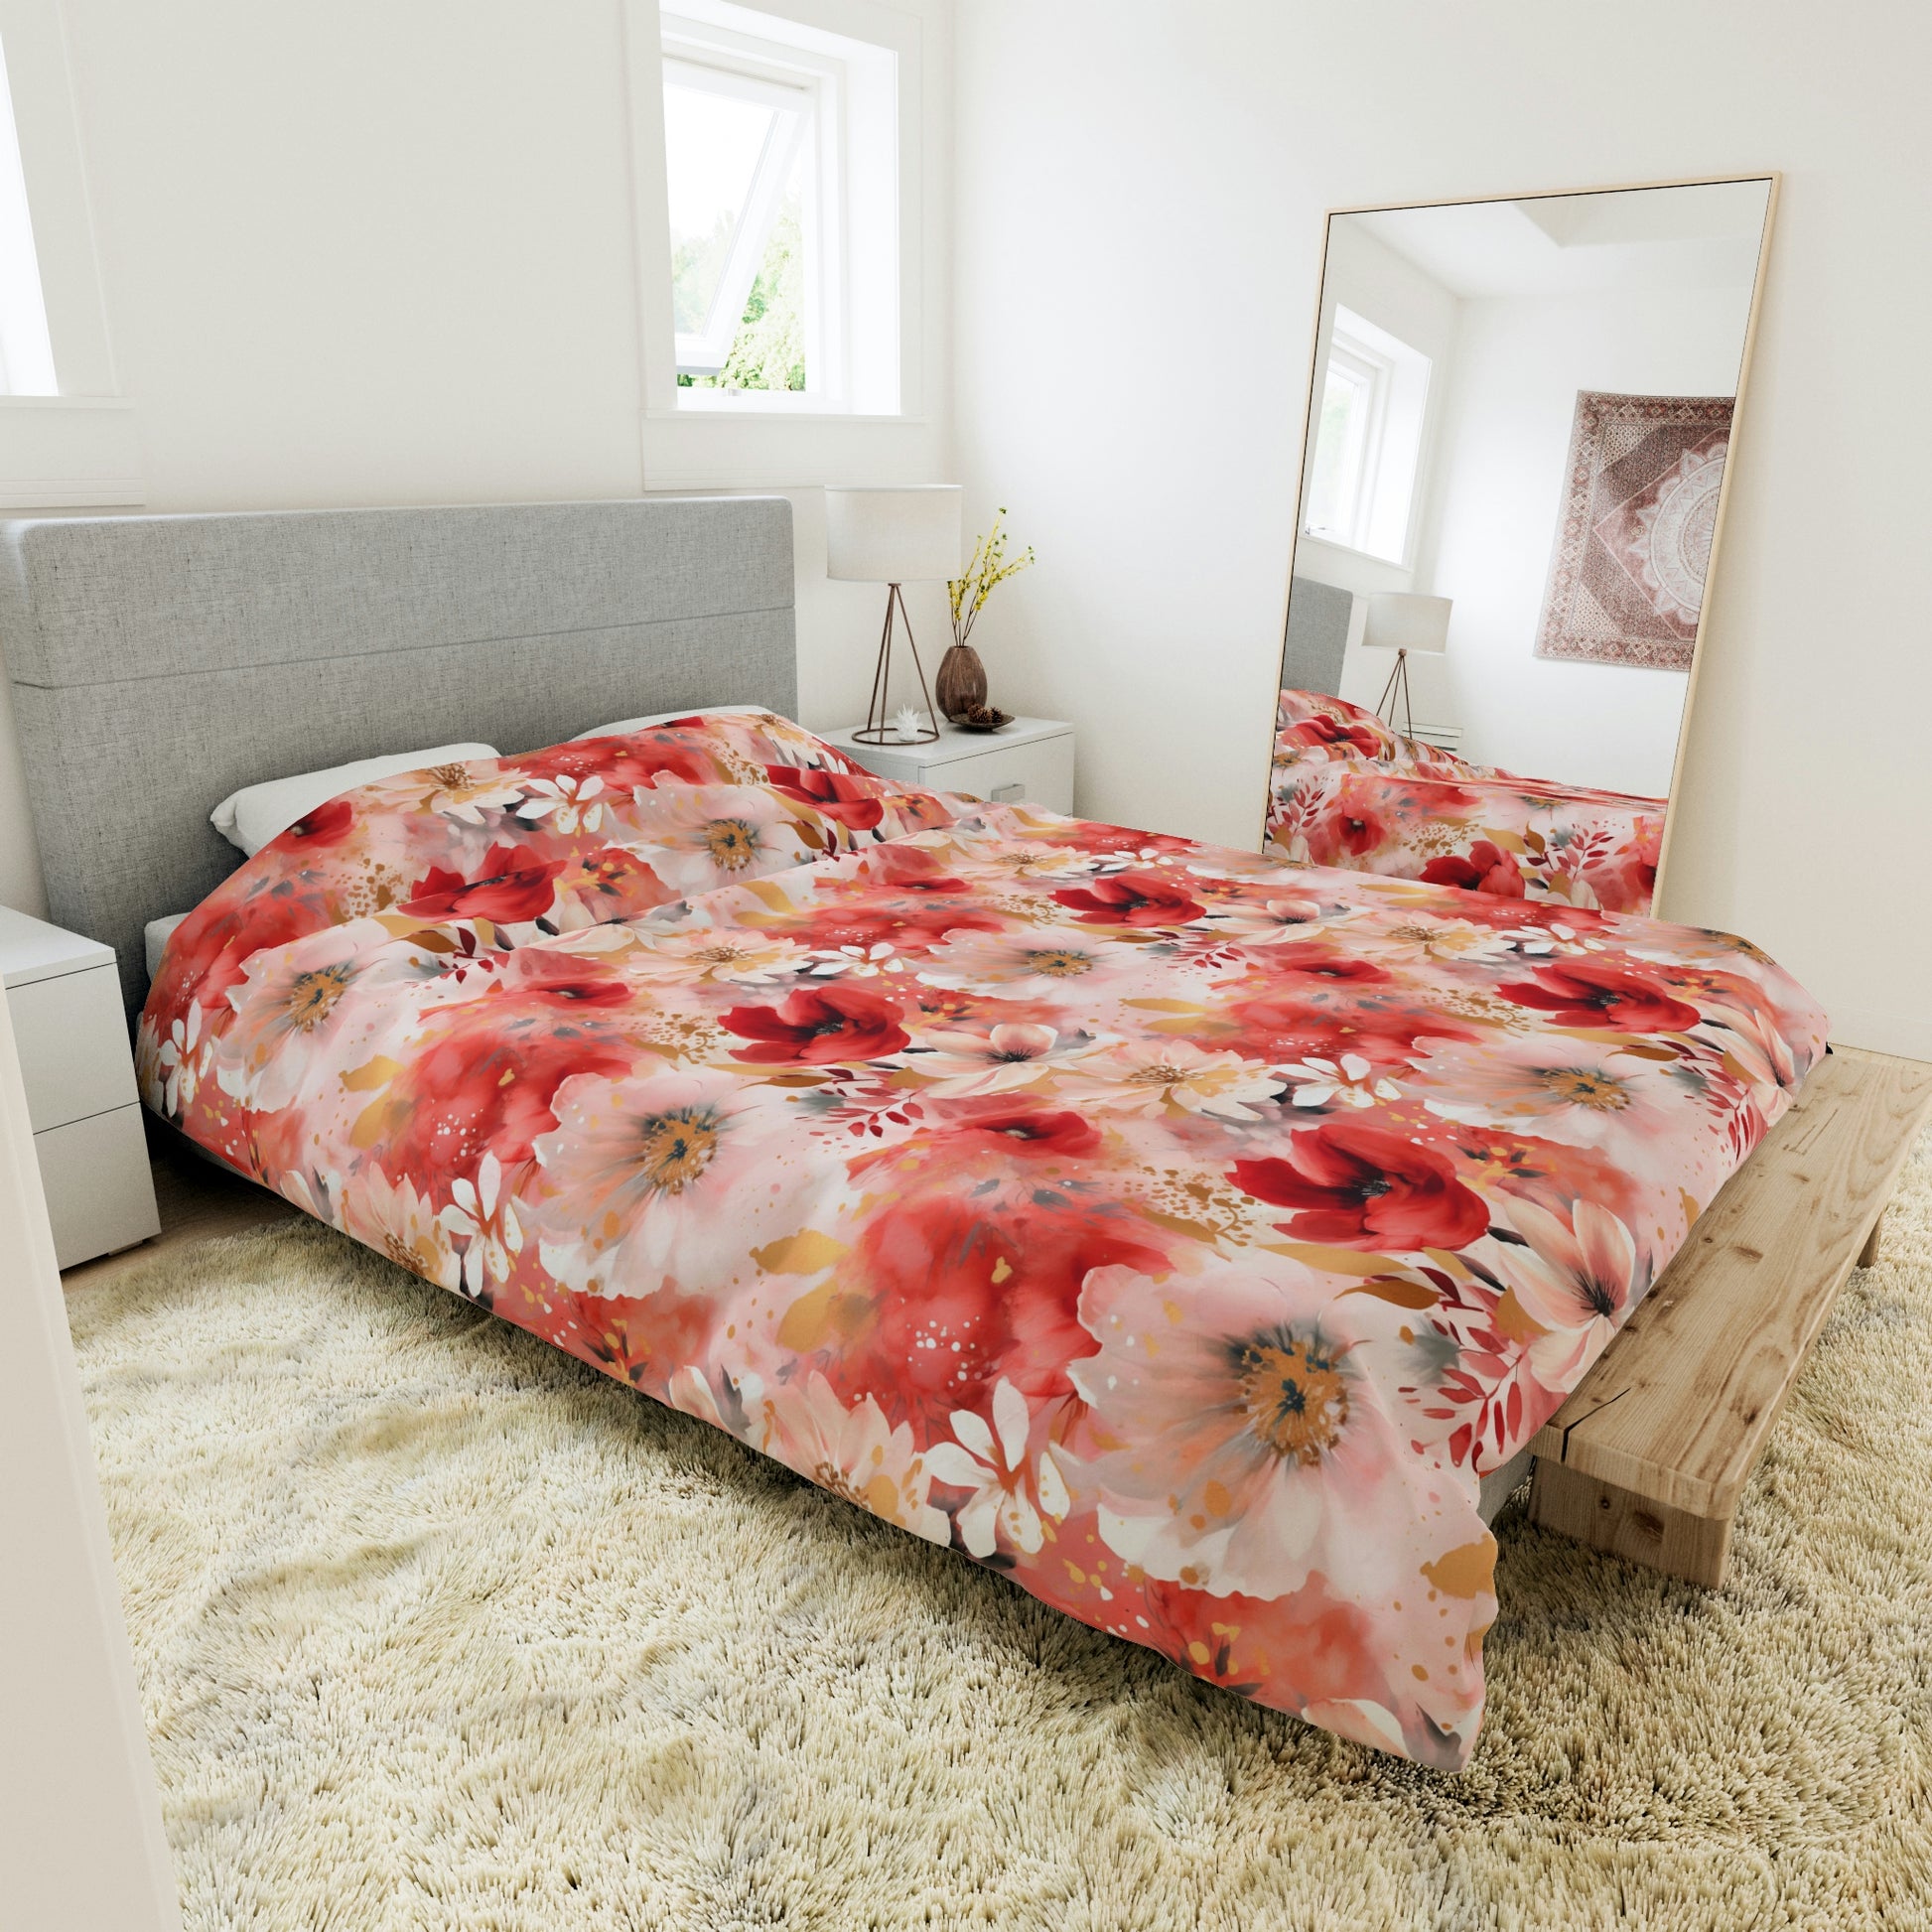 red and pink floral duvet cover, pink and red floral duvet cover, pink abstract floral duvet cover, red abstract floral duvet cover